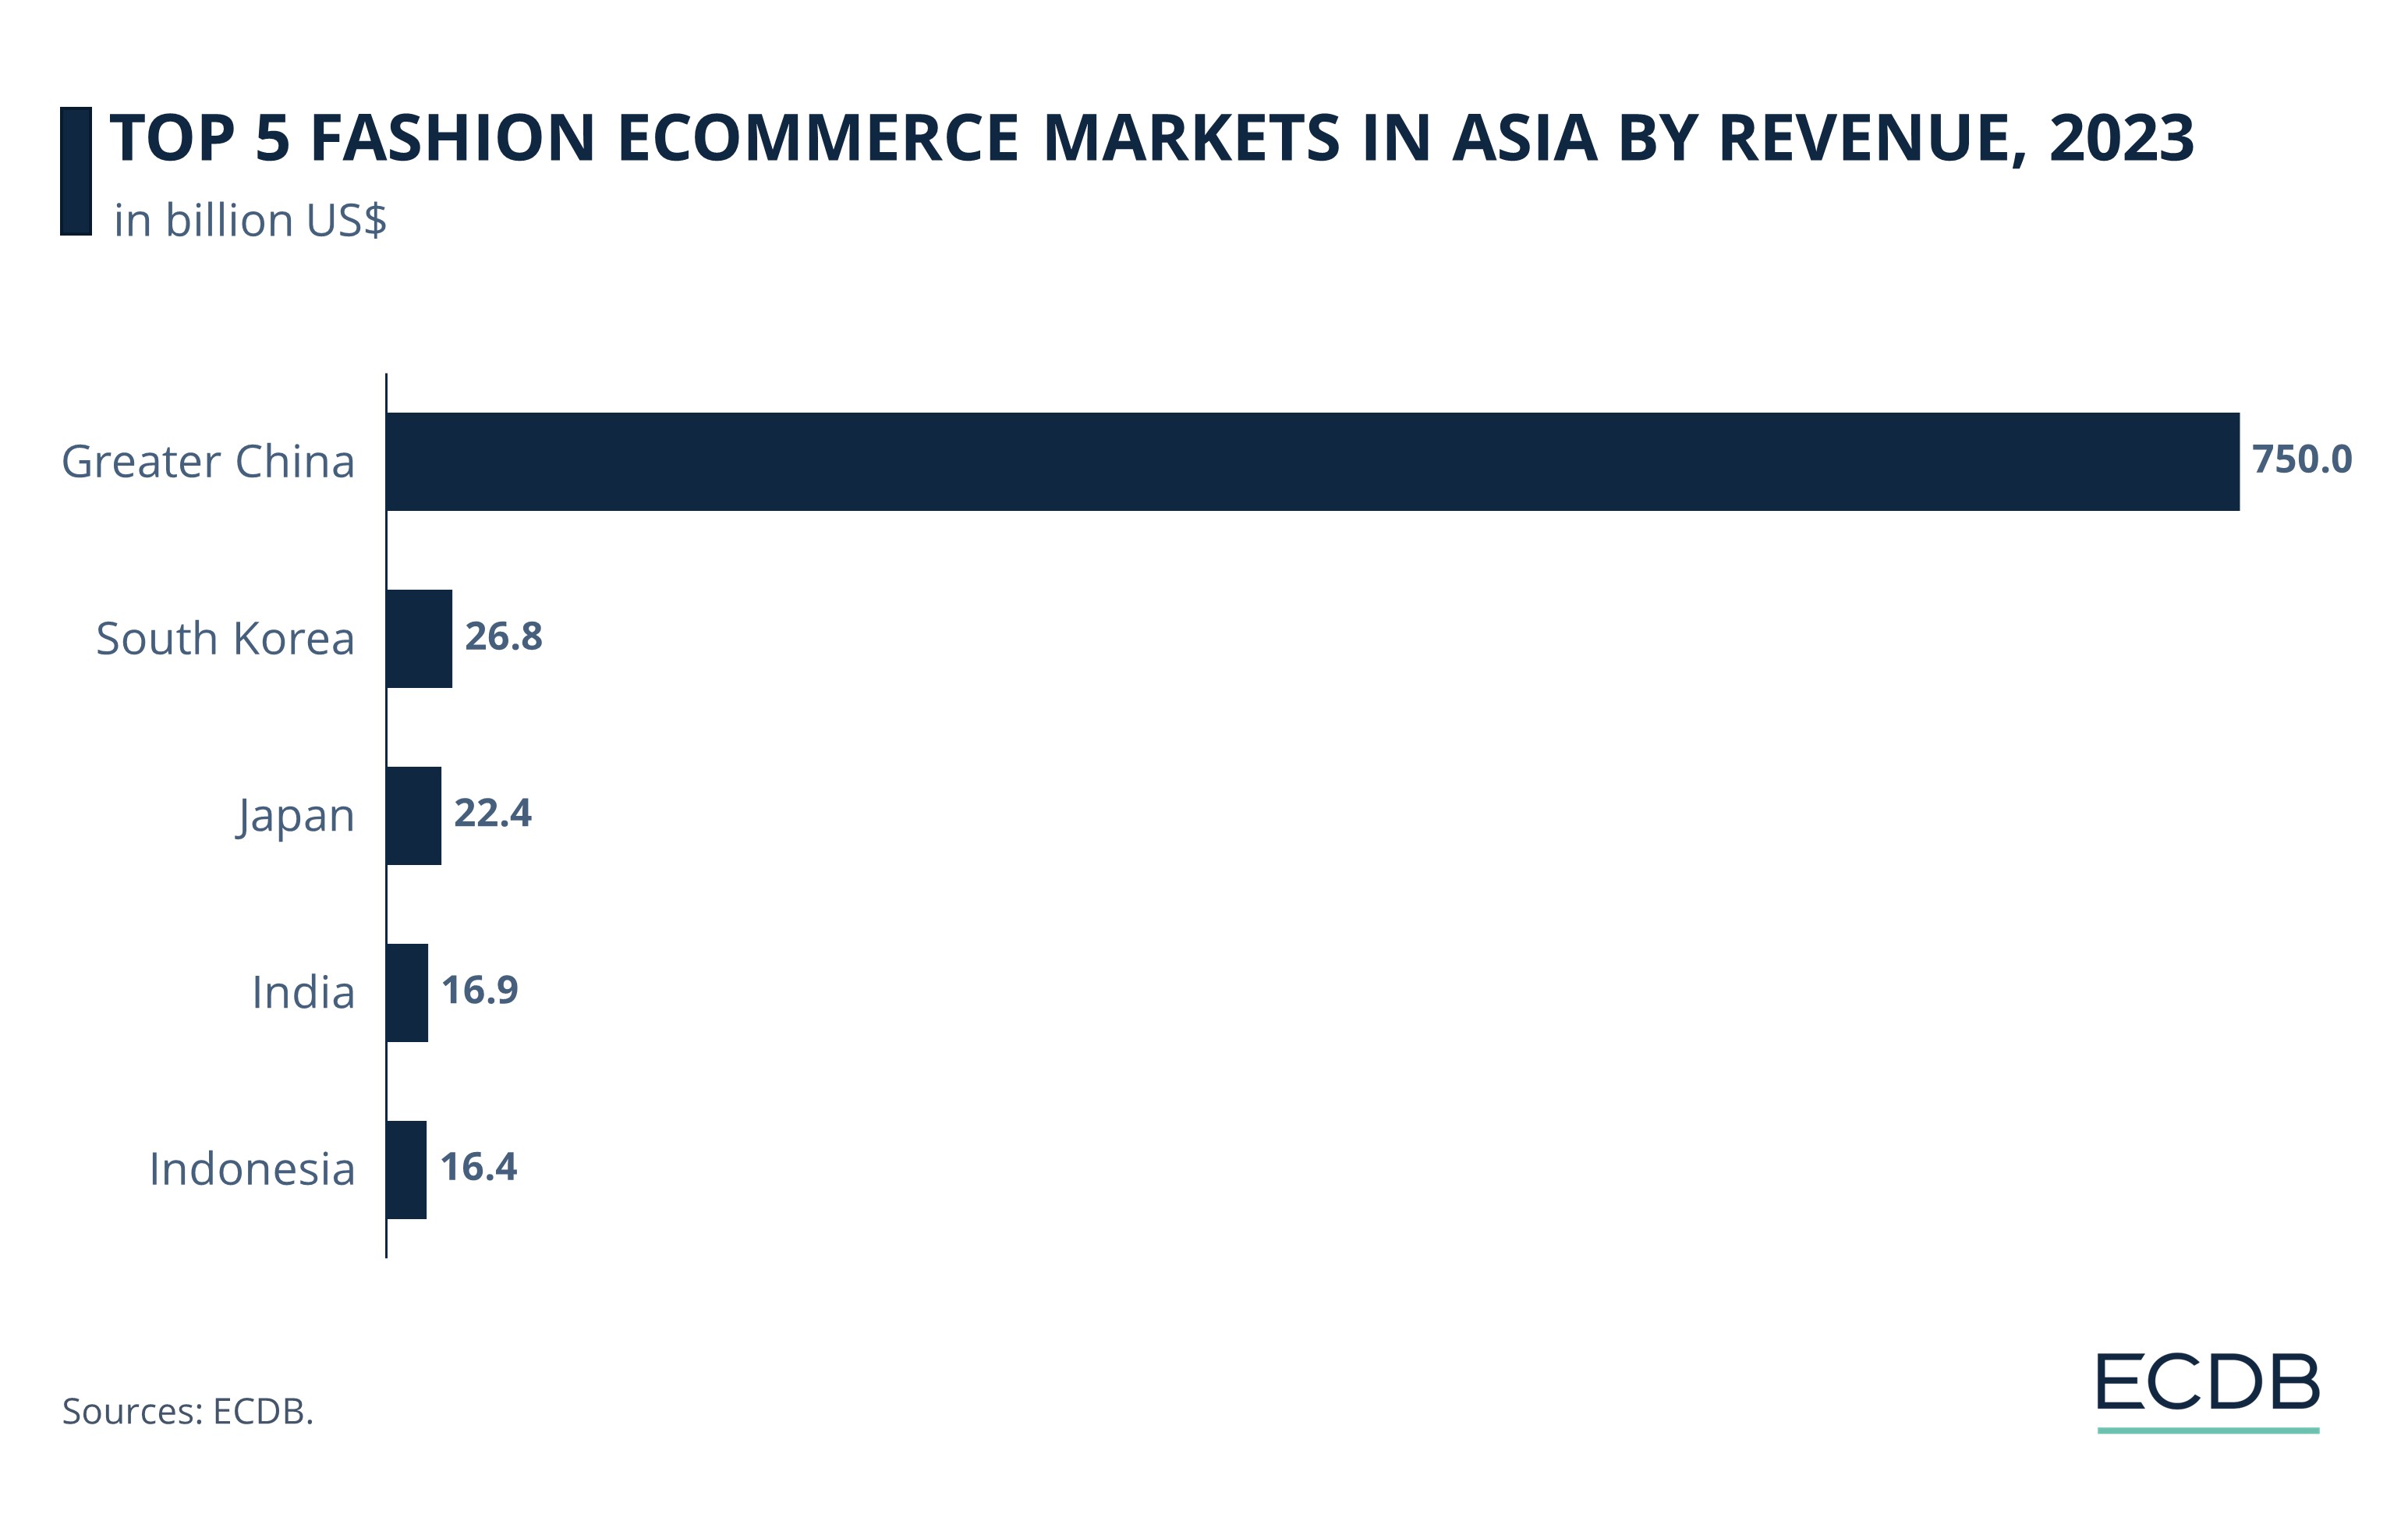 Top 5 Fashion Ecommerce Markets in Asia by Revenue, 2023